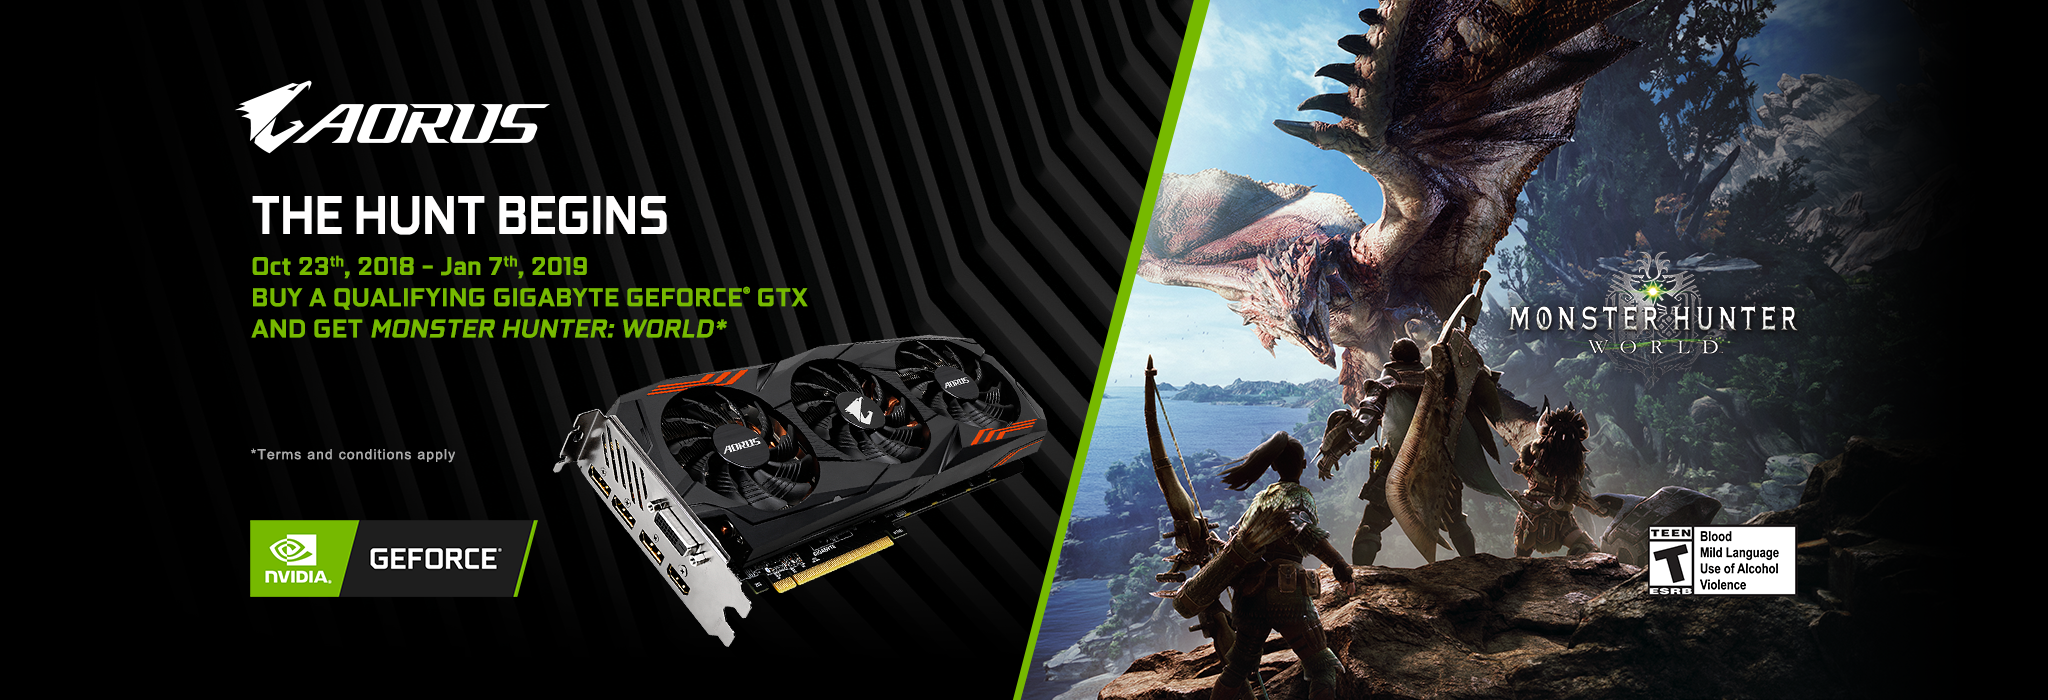 Buy Gigabyte Aorus Nvidia Geforce Gtx 1060 Geforce Gtx 1070 And Geforce Gtx 1070 Ti Graphics Card And Get Monster Hunter World Game For Free Aorus